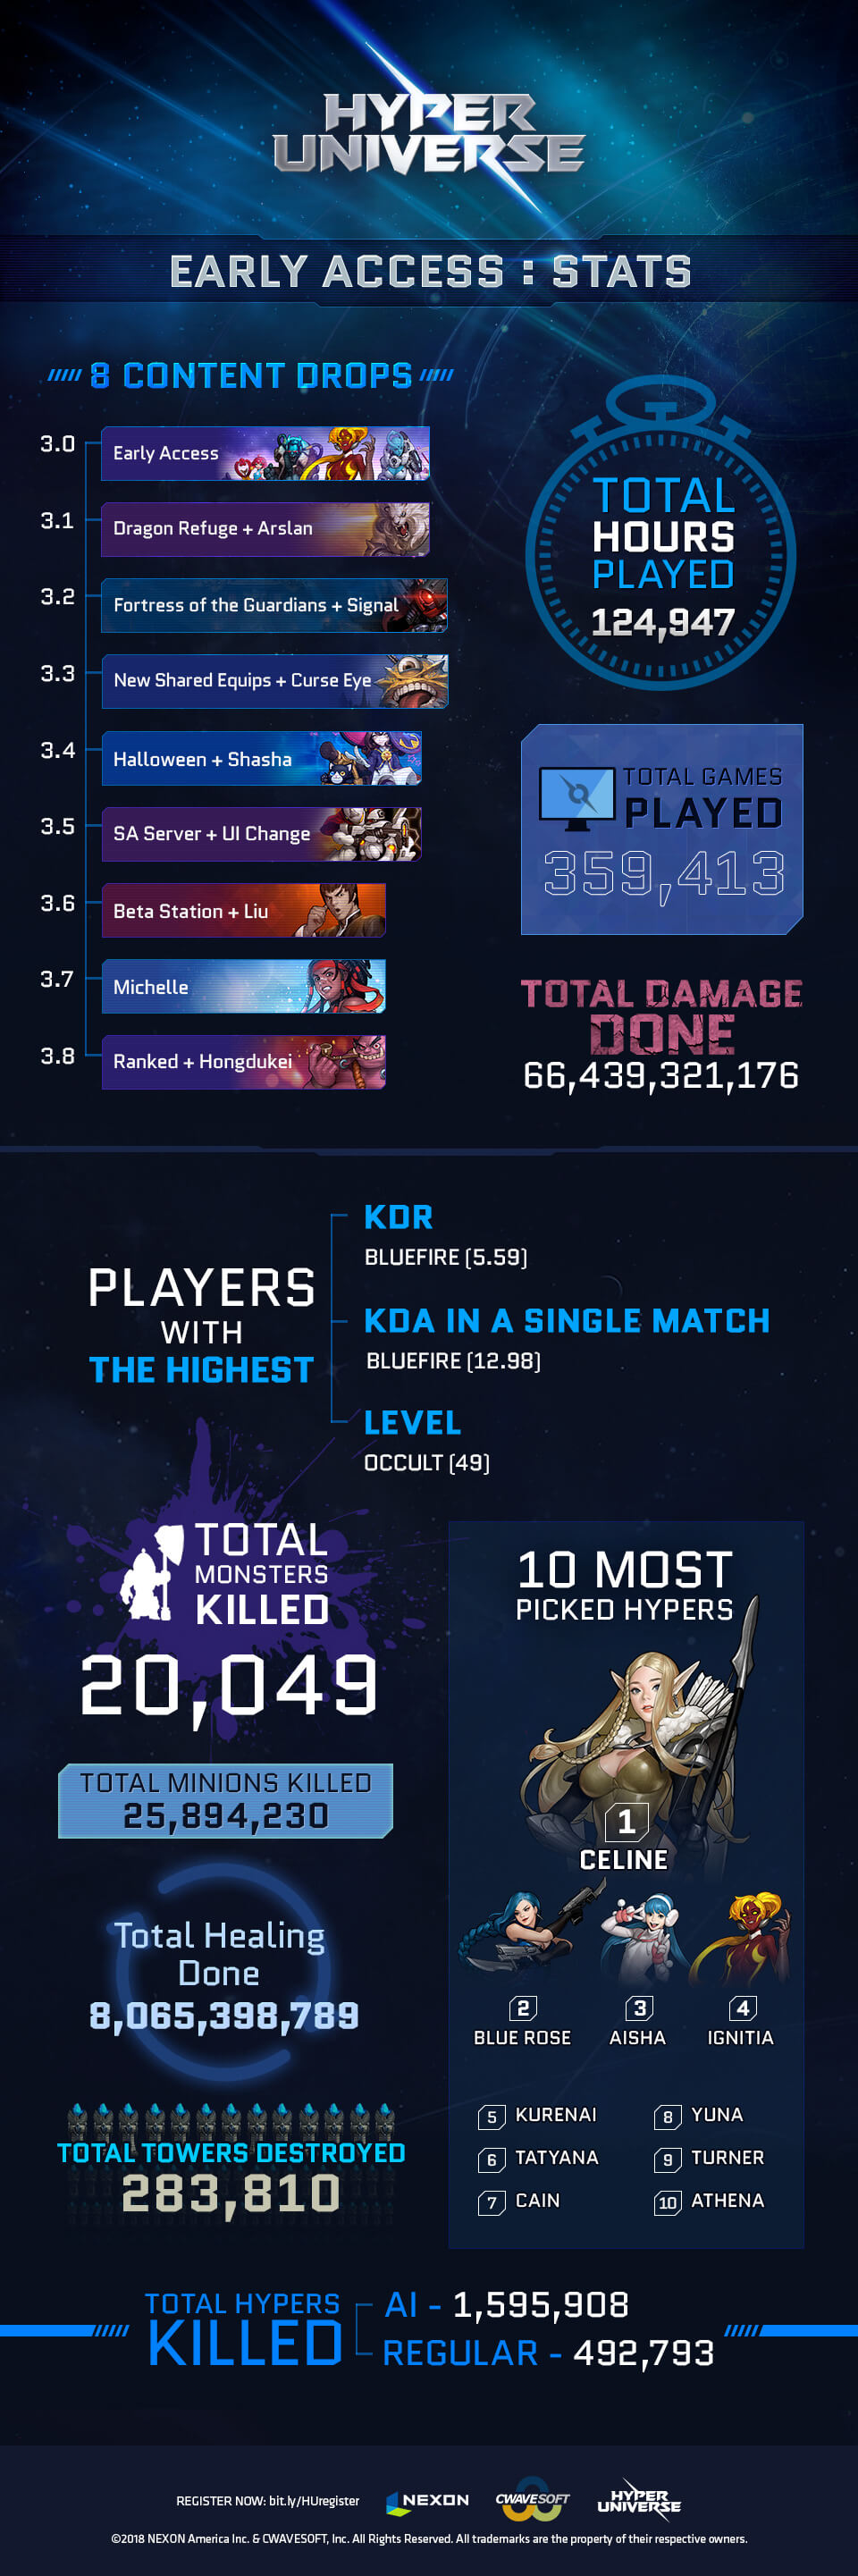 Hyper_Universe_Infographic-1